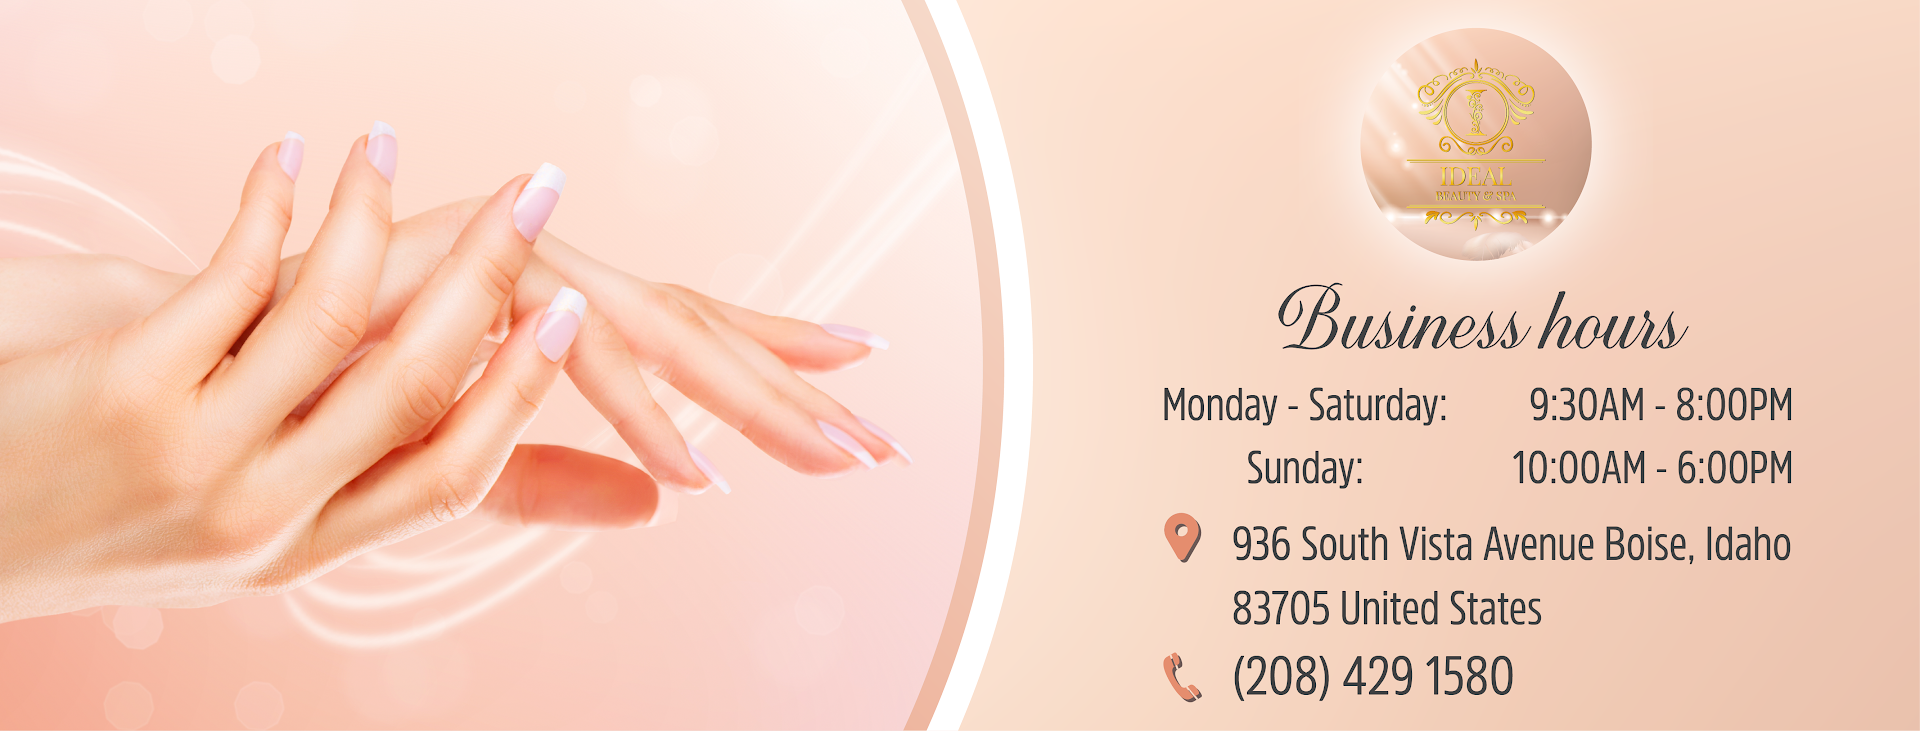 IDEAL Beauty and Spa Boise